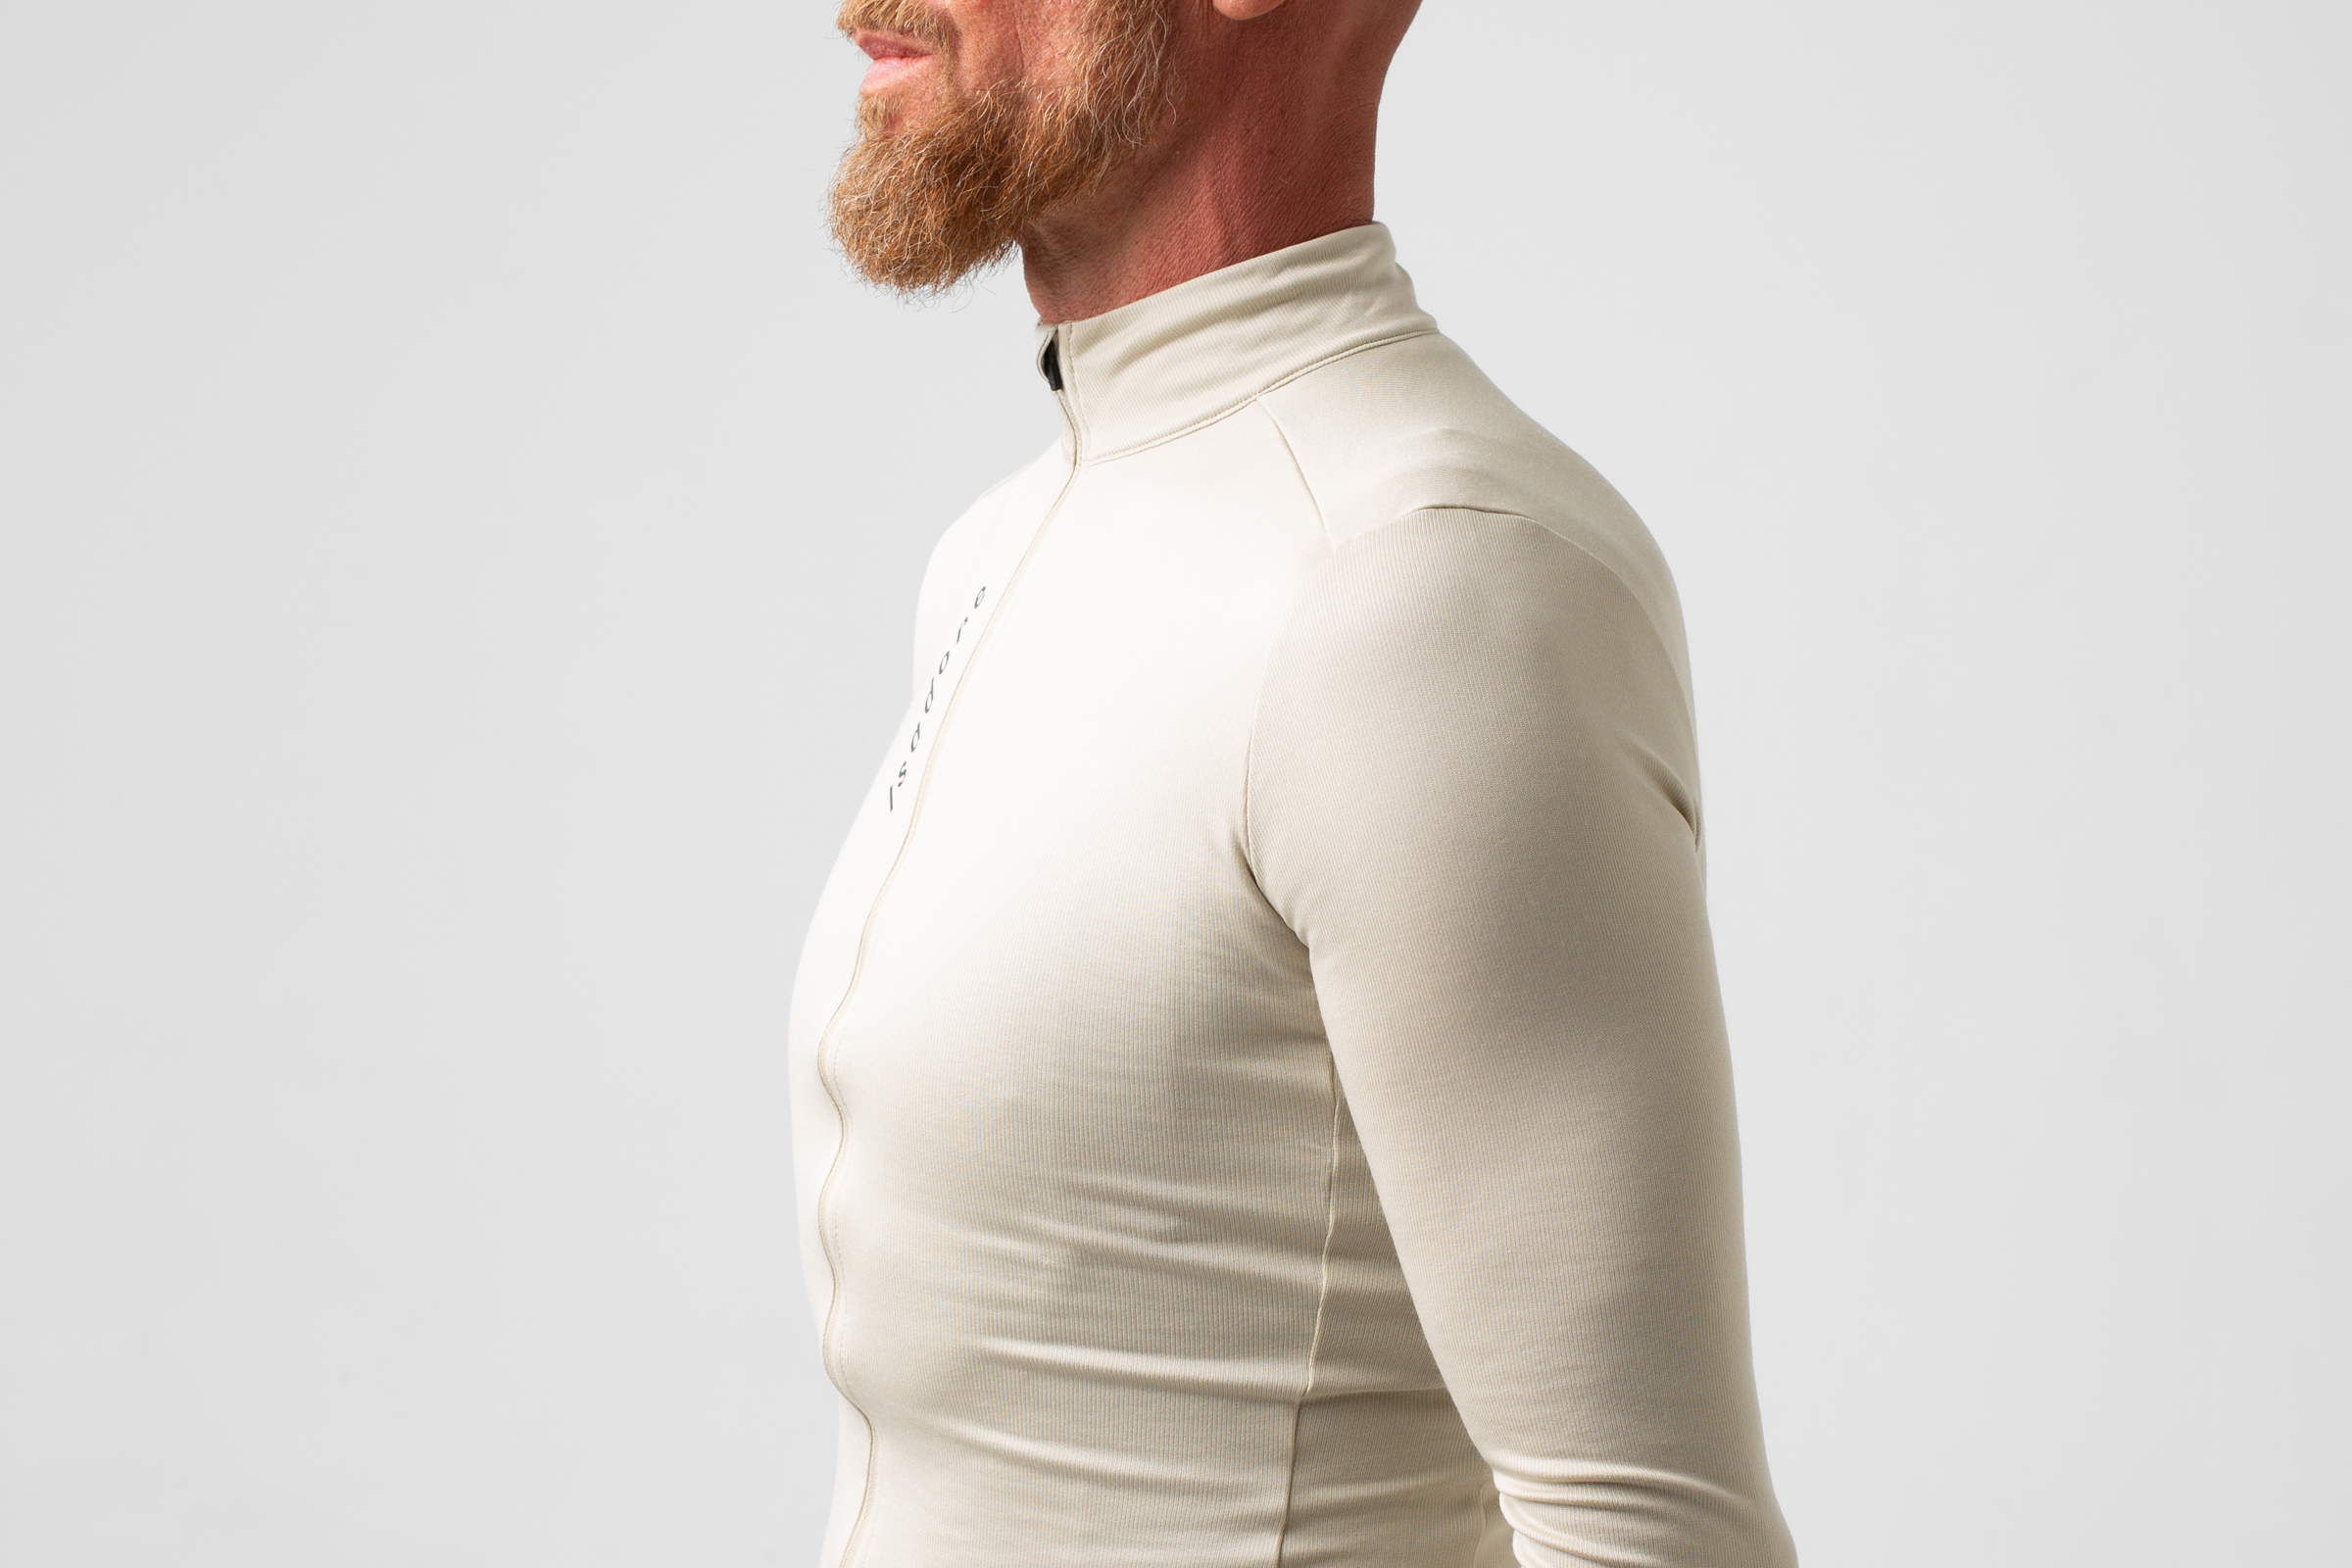 Signature Thermal Long Sleeve Jersey Pelican